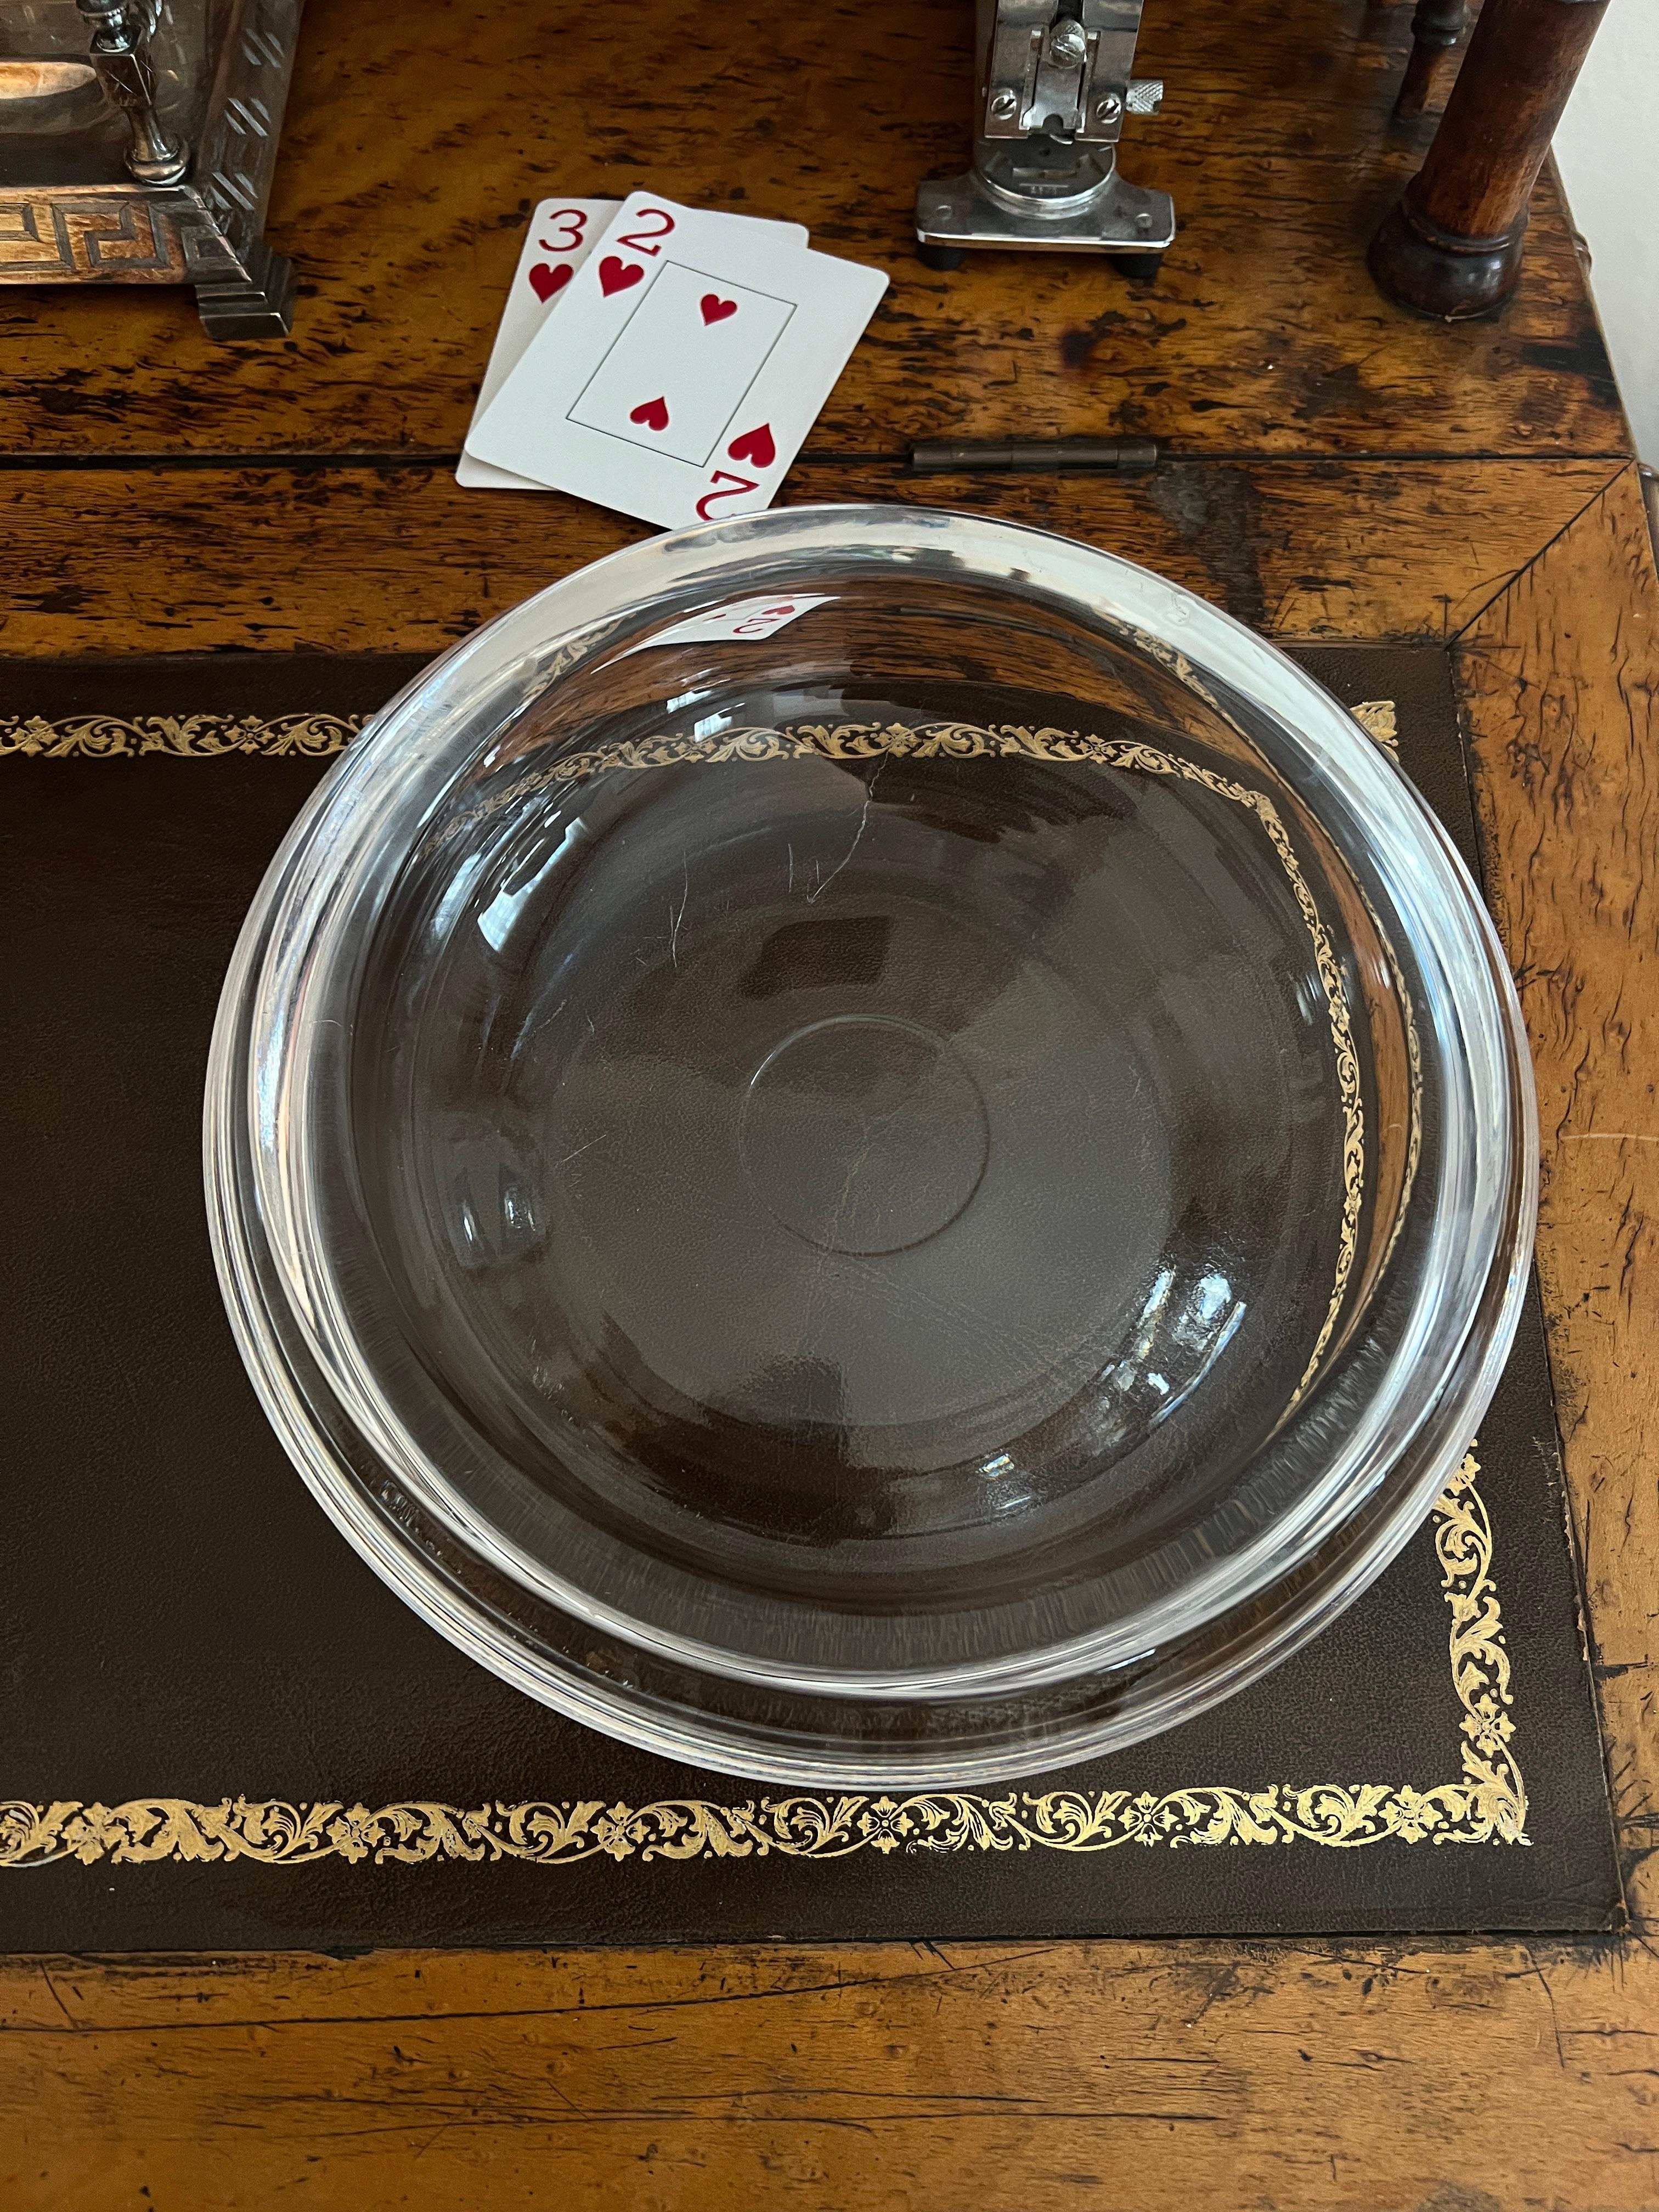 A large and very versatile glass bowl, dish, or ashtray.   The piece is very thick and heavy and has a wonderful look.

Perfect for serving candy or use as a cigar ashtray.  A compliment to any cocktail table, bar or use on the dining table as